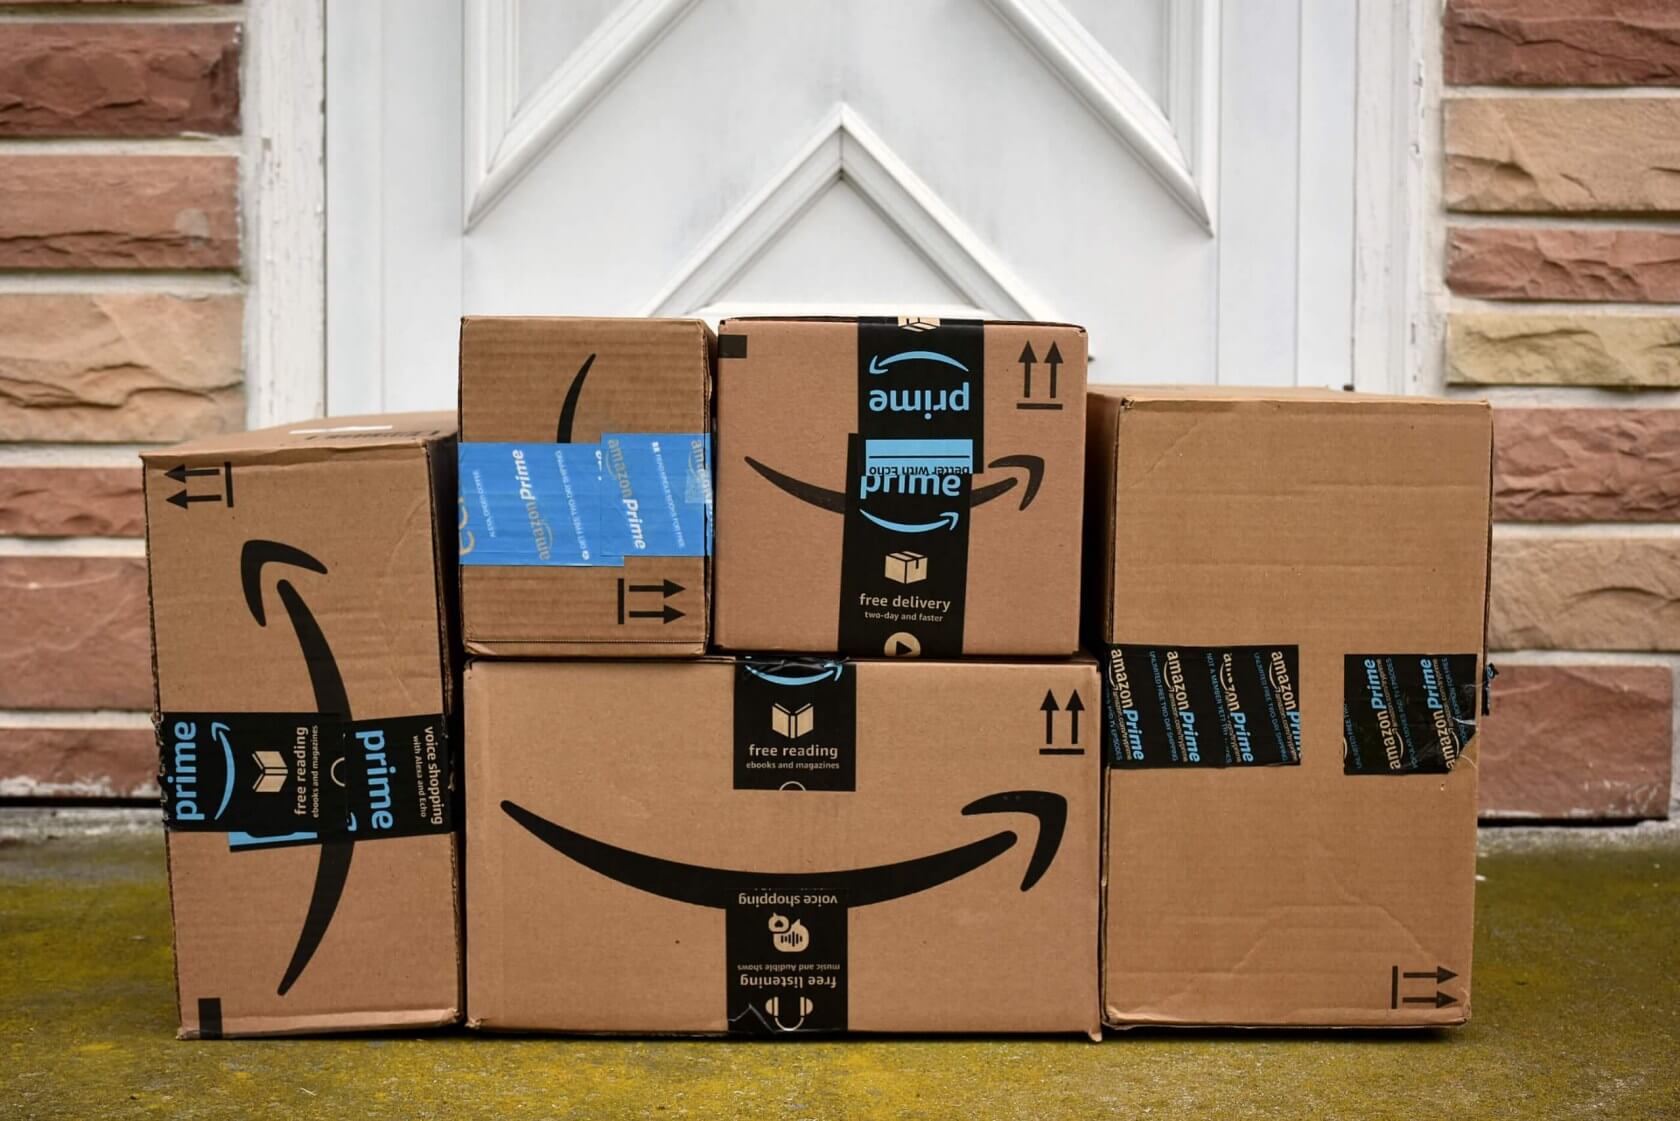 Amazon expected to postpone Prime Day this year